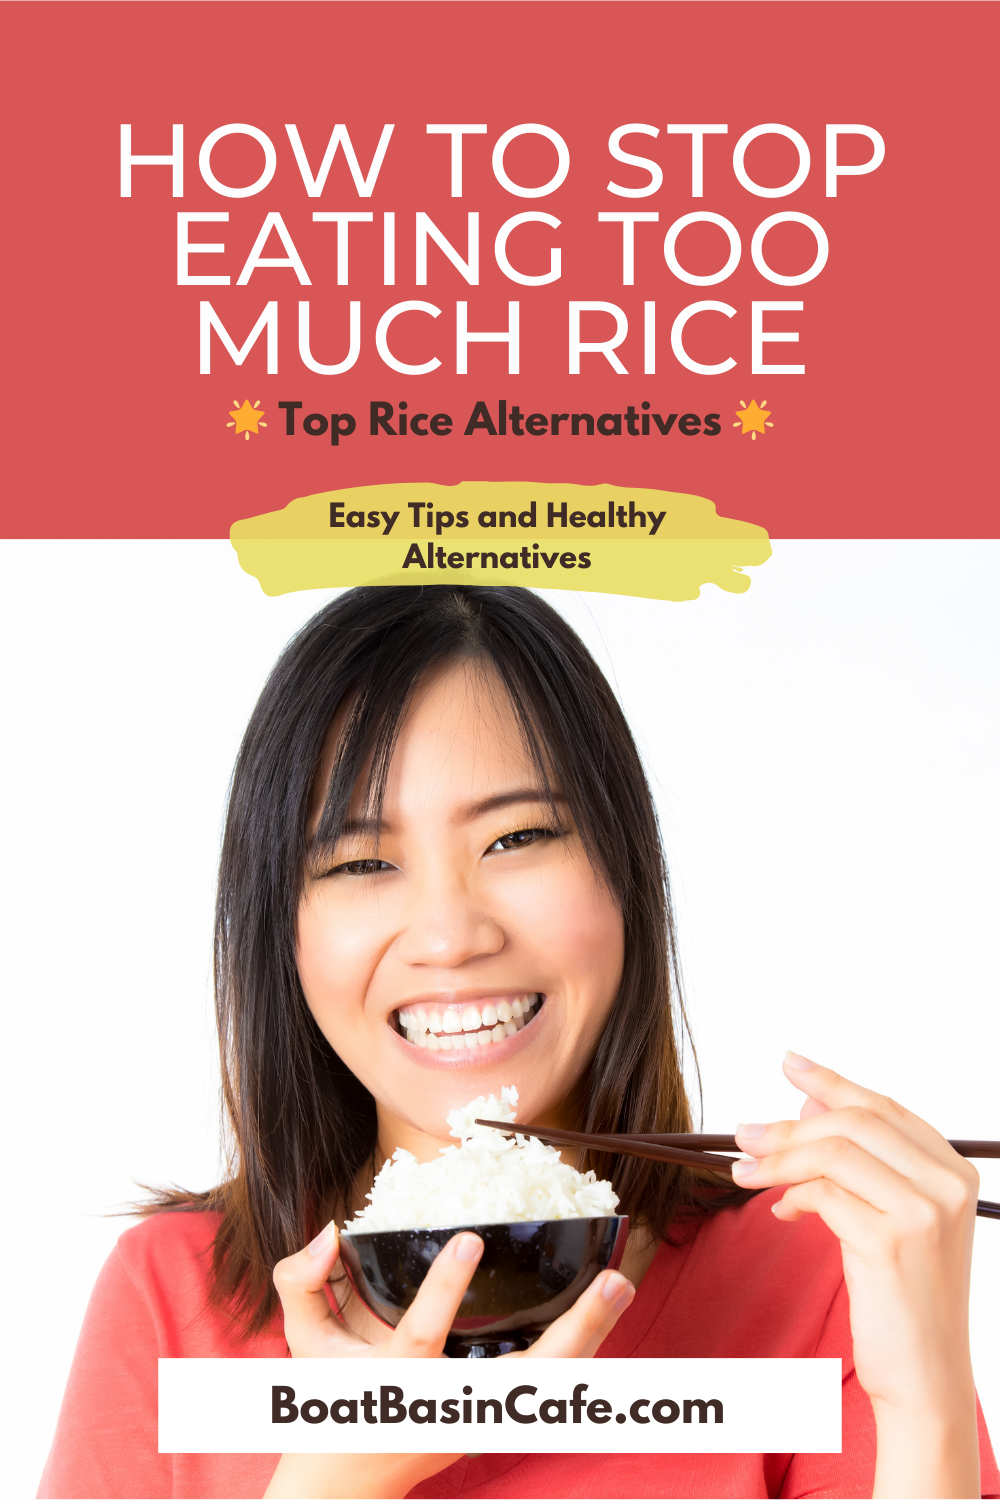 How to Stop Eating Too Much Rice: Easy Tips and Healthy Alternatives